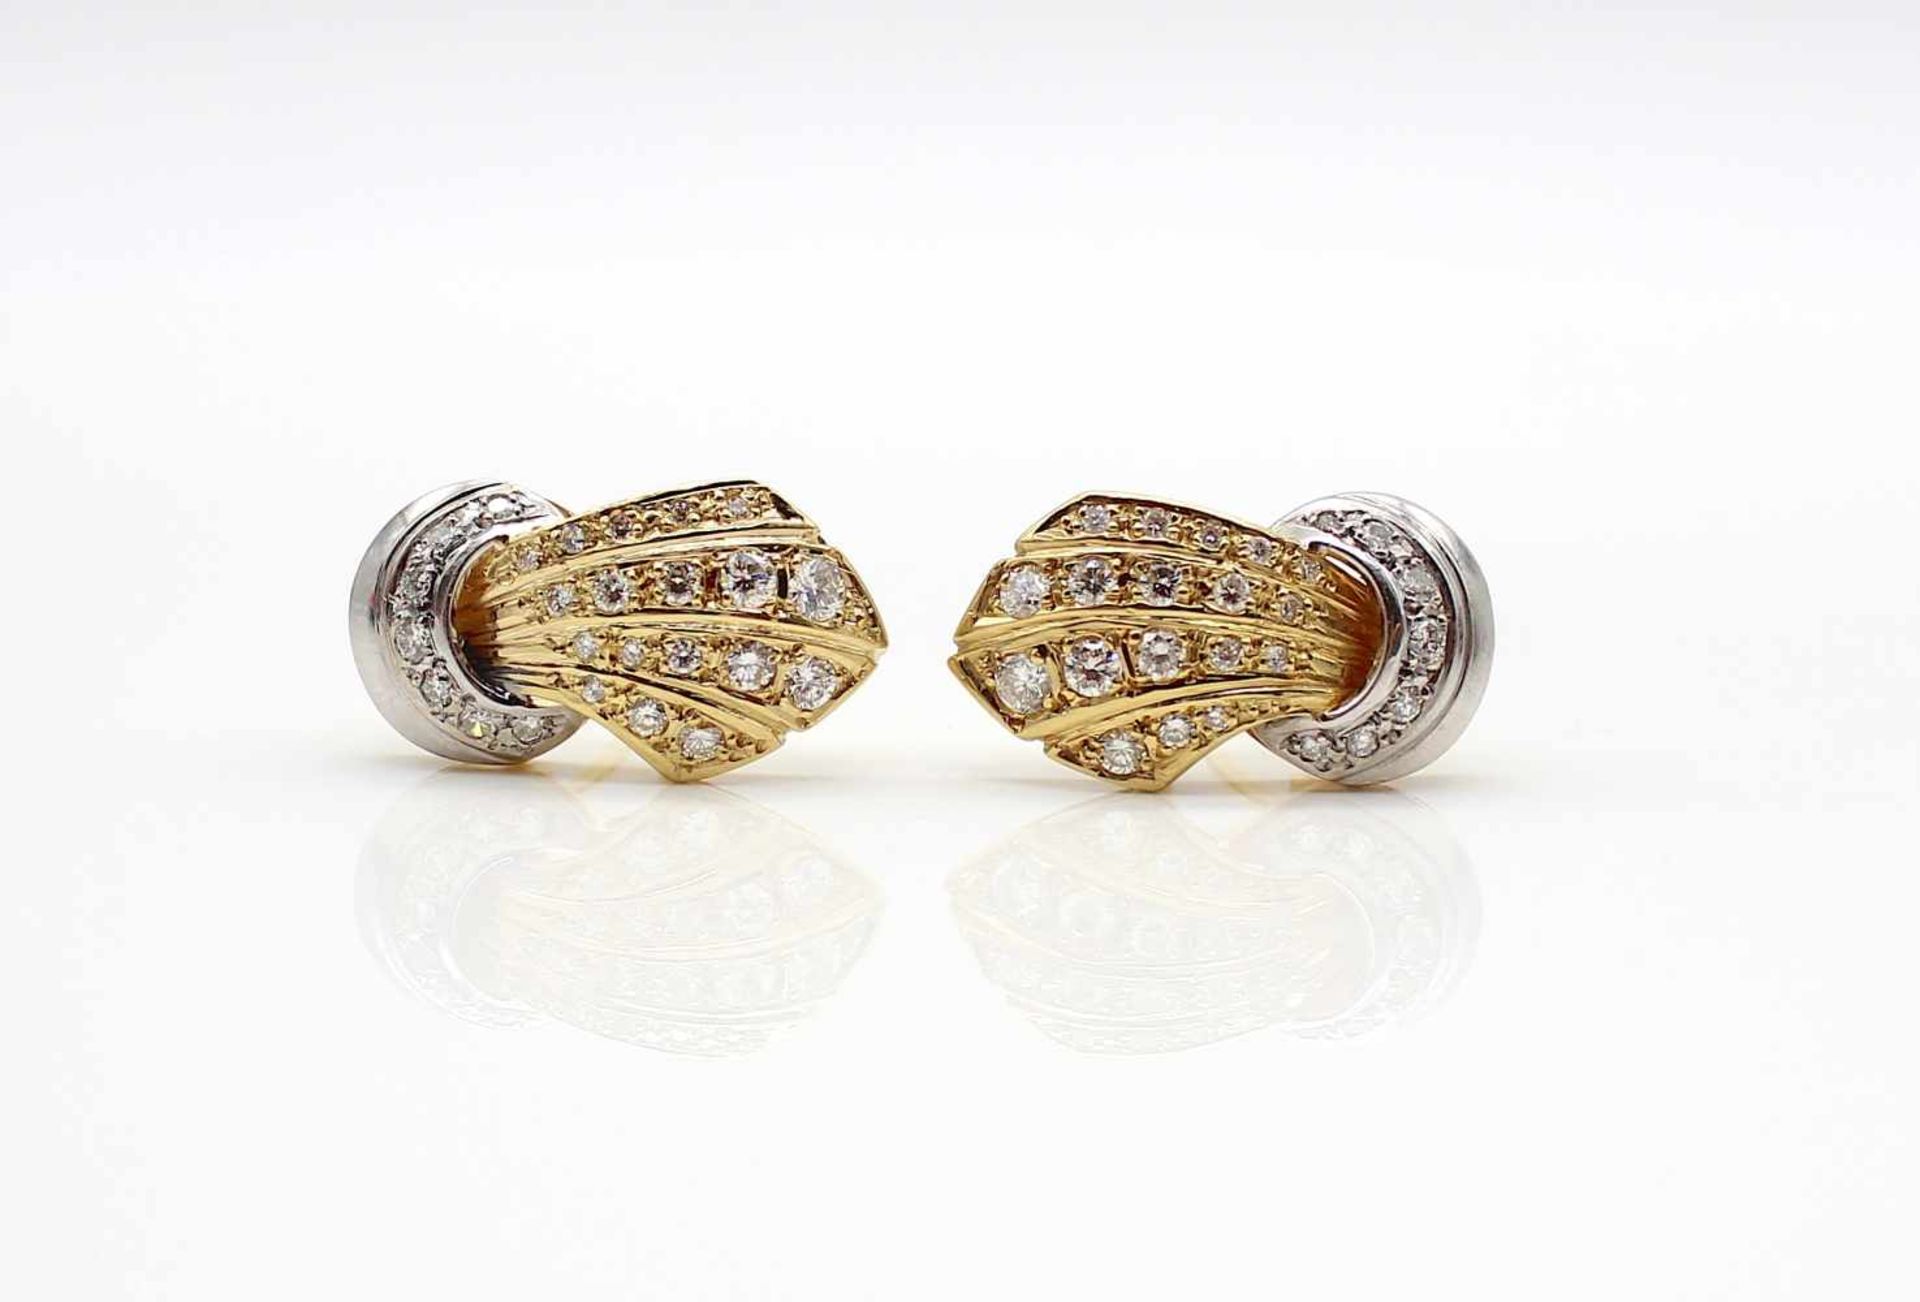 1 pair of earclips made of 750 gold with 50 diamonds, total approx. 1.4 ct in high purity and - Bild 3 aus 3